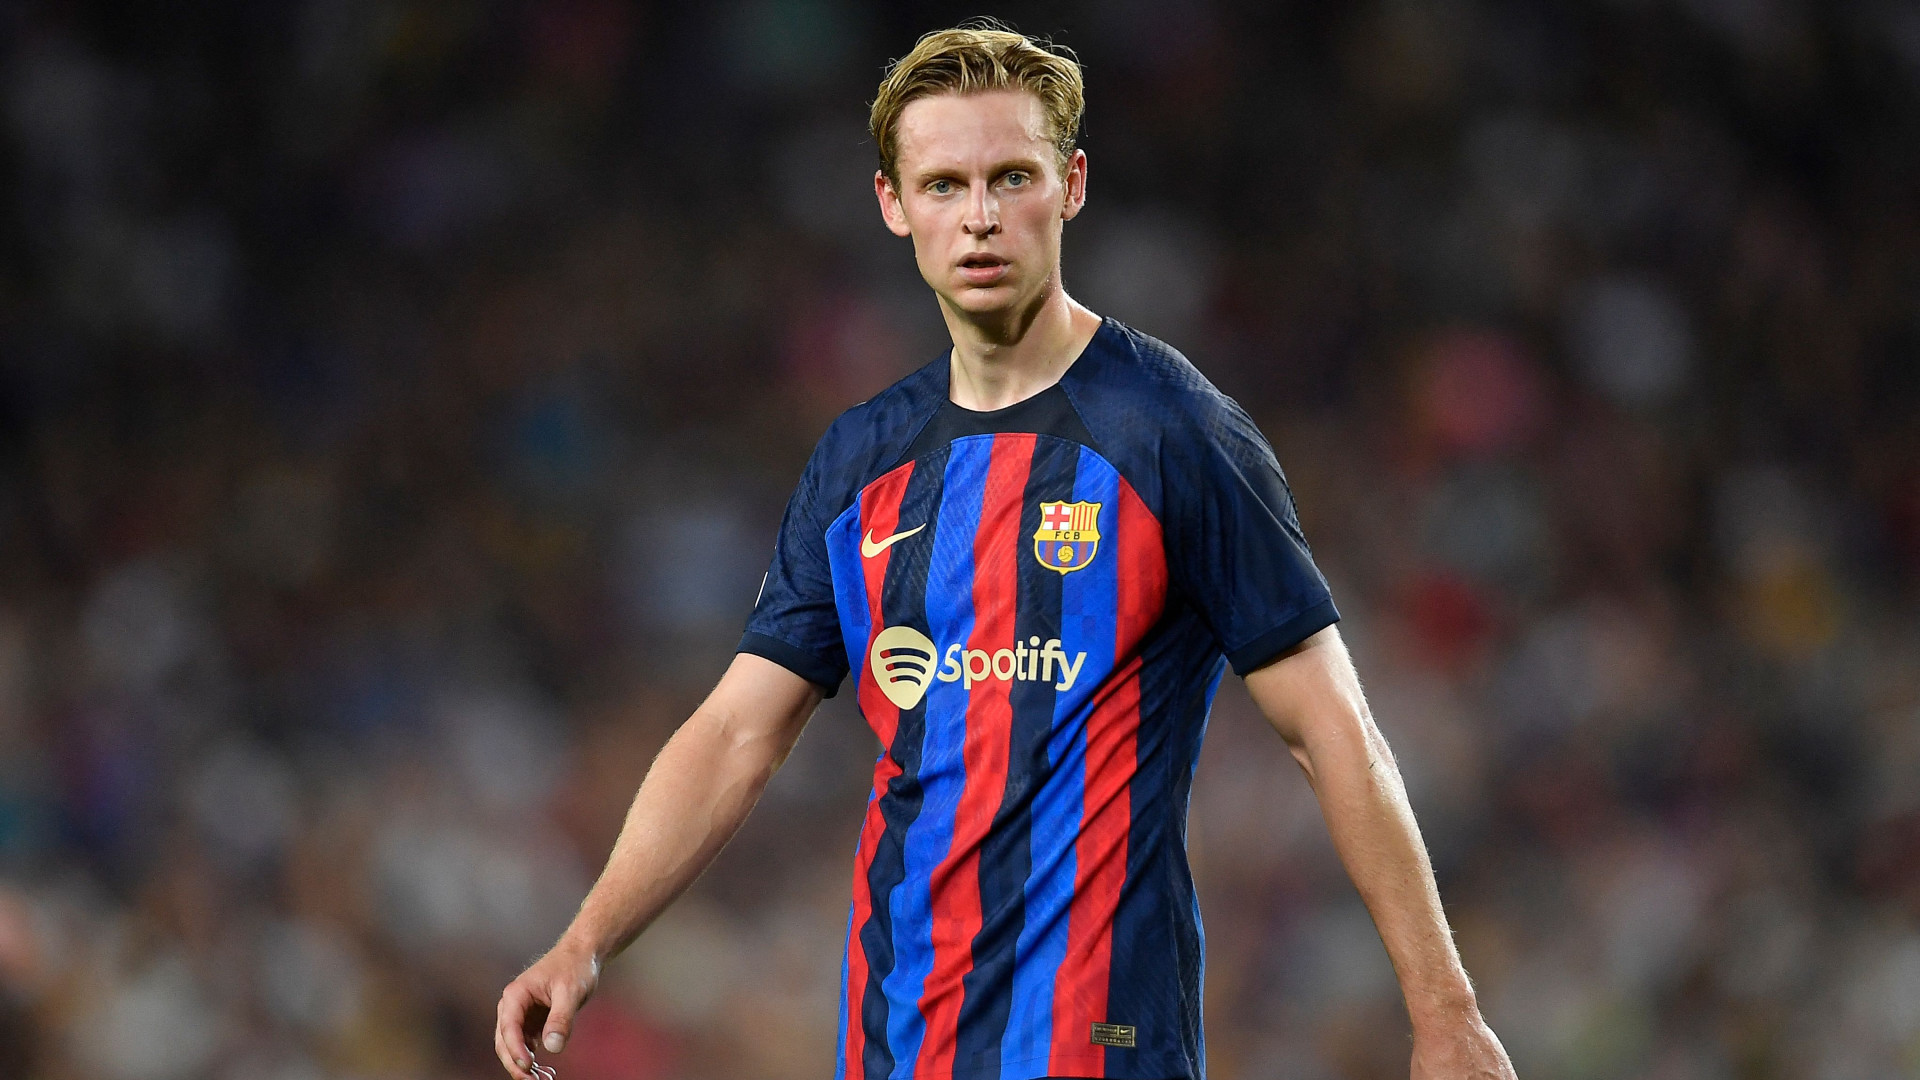 De Jong and Memphis Depay ruled out as Barcelona's injuries pile up |  Goal.com Singapore